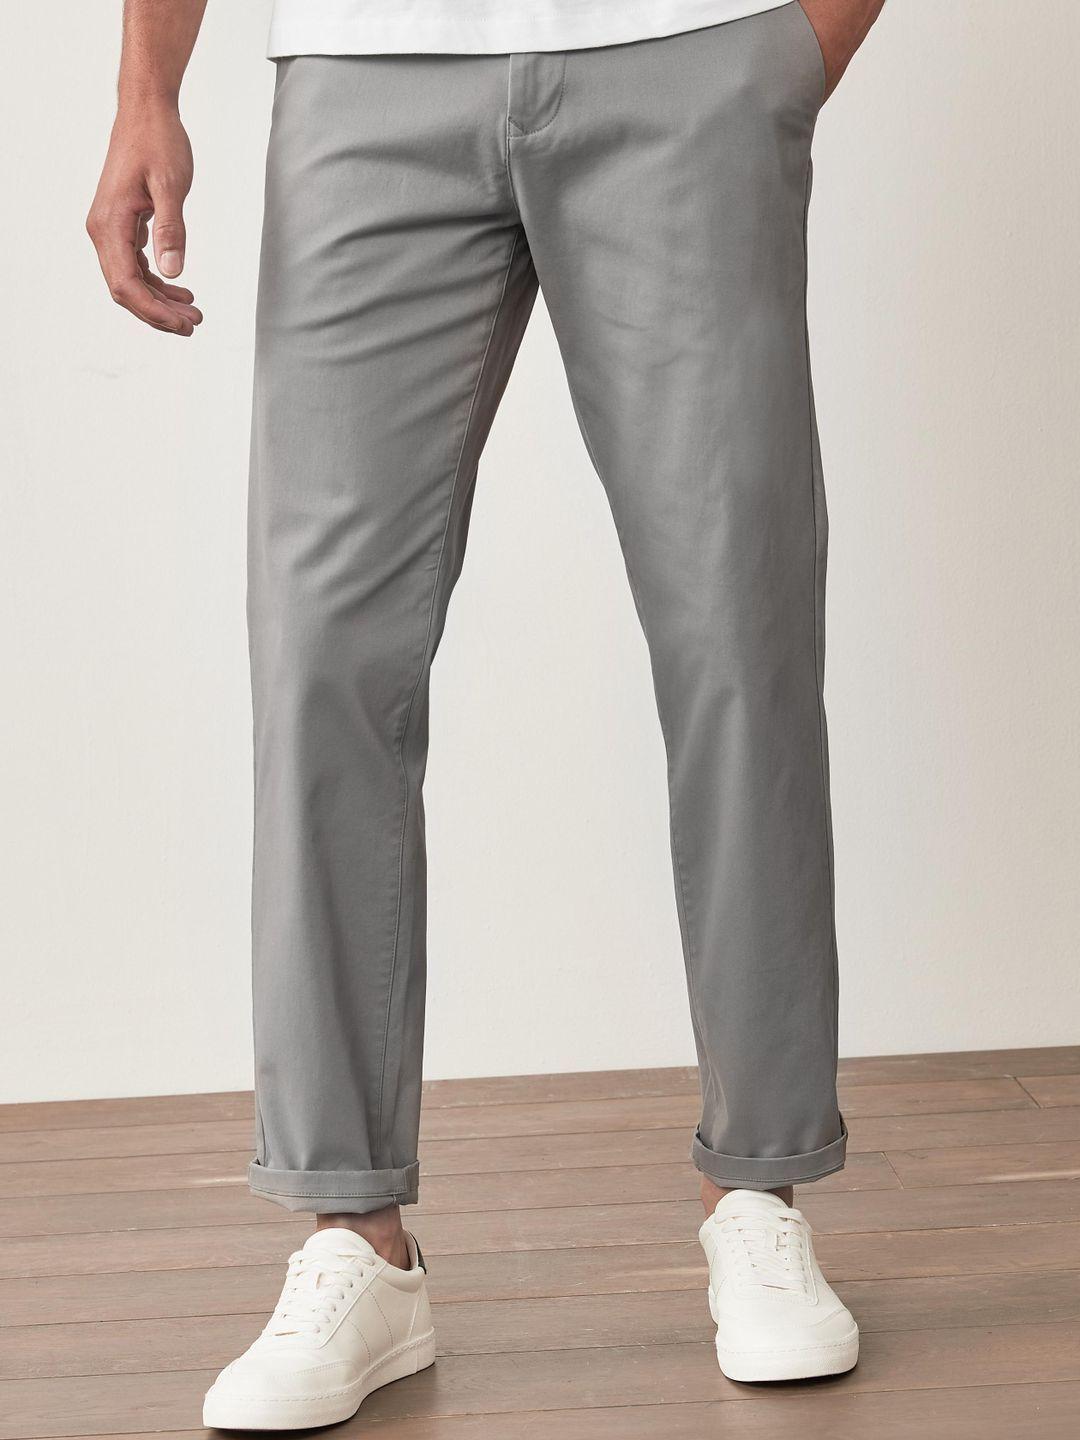 next men straight fit mid-rise chinos